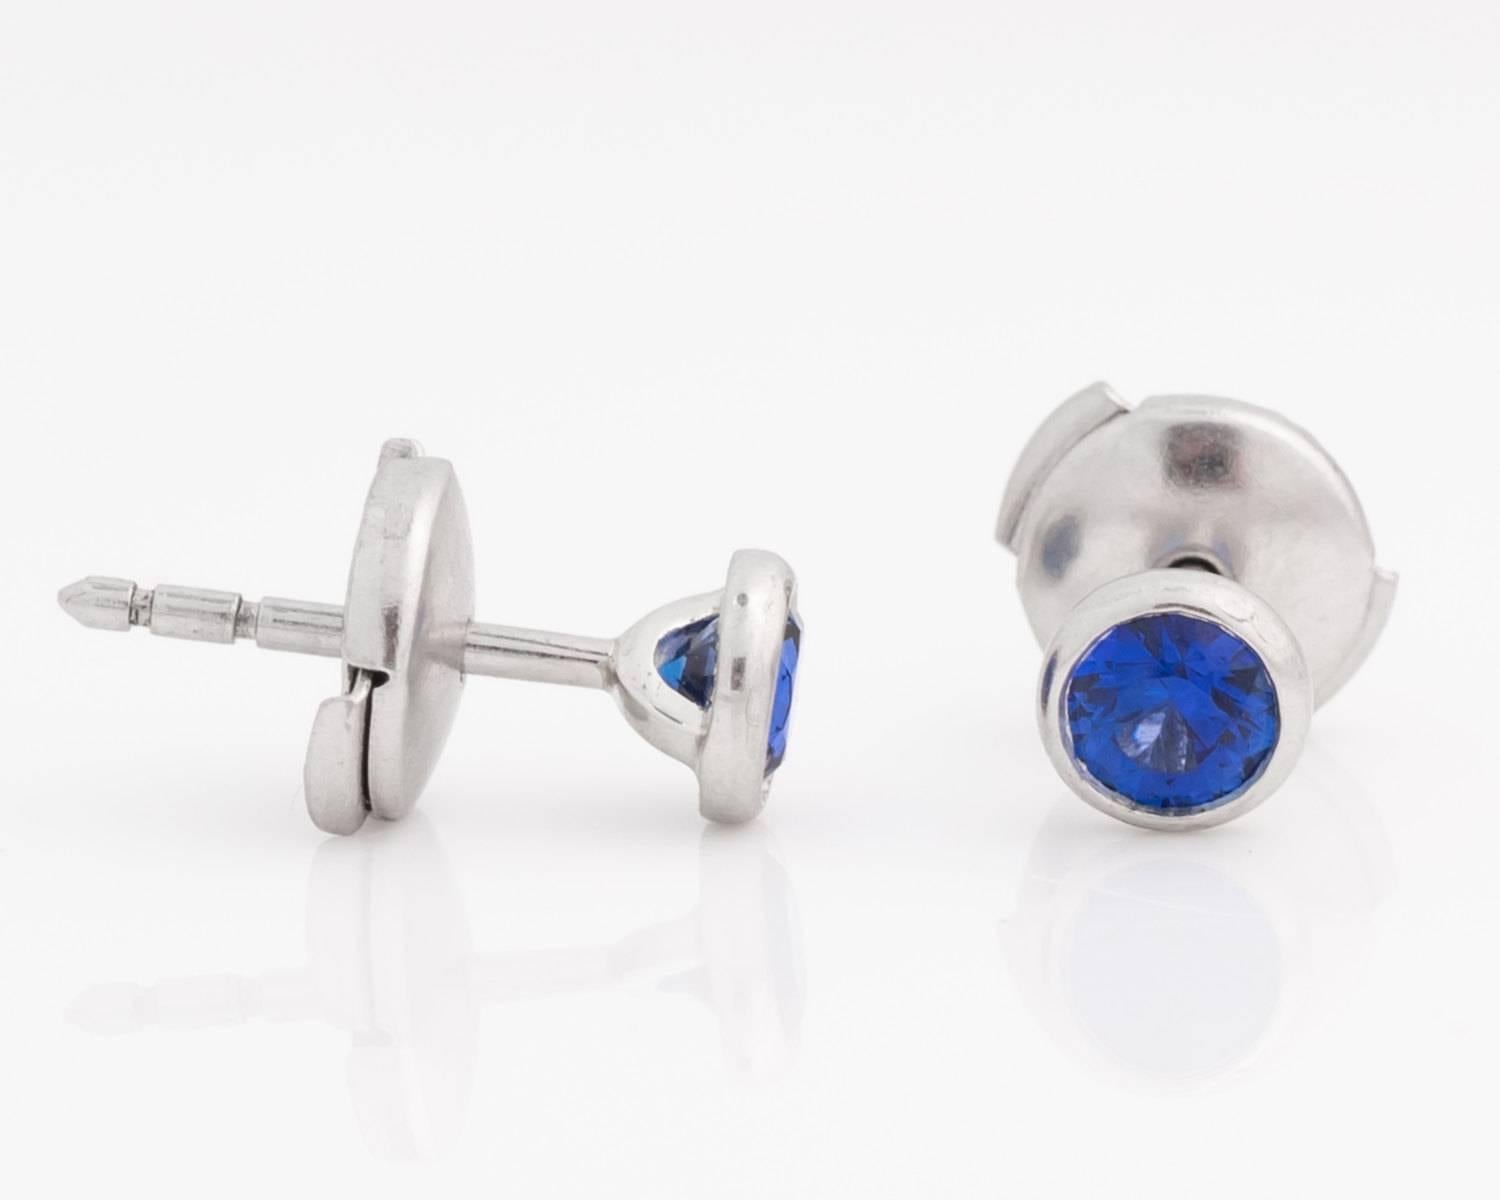 Elsa Peretti Collection Purple-Blue Sapphire Earrings
Platinum Crafted 1.3 grams, Bezel Set (held by U-shaped gallery, allowing bottom of sapphires to be viewed)
Unique Backings on these earrings - rounded frame which opens upon pushing the two